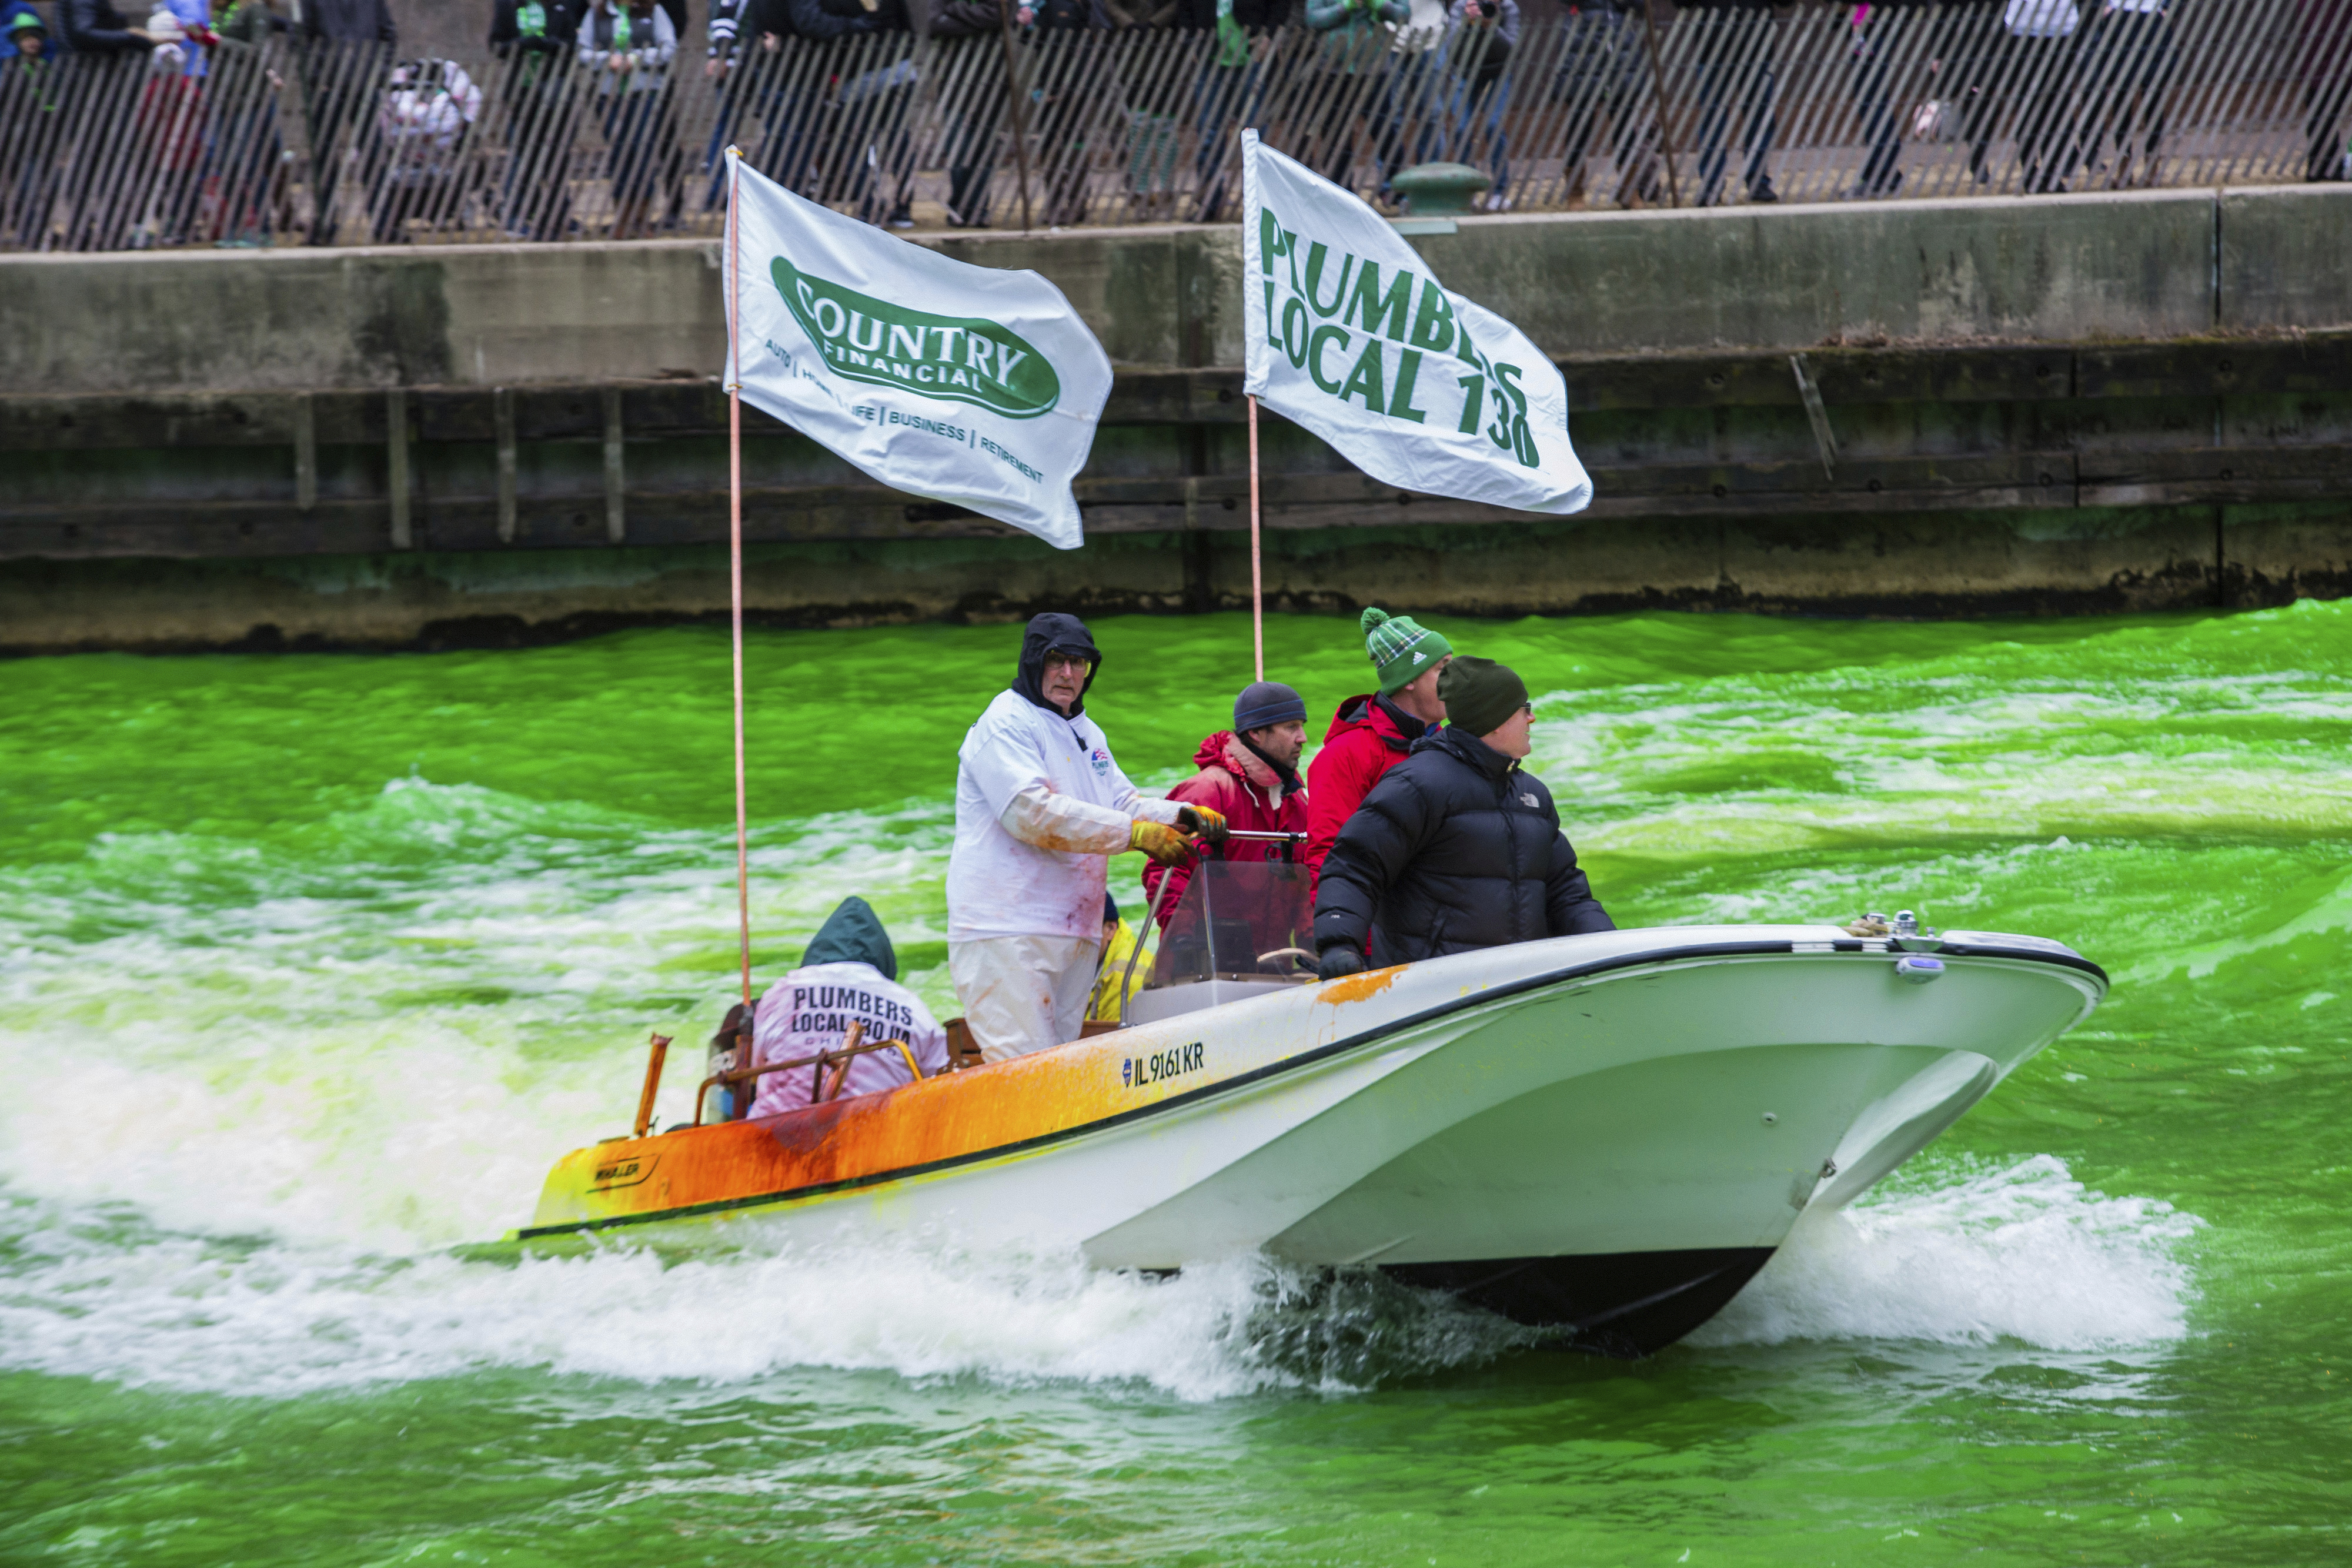 The Plumber's Local Union 130 dyes the Chicago River green to celebrate St. Patrick's Day, Saturday, March 17th, 2018.   Thousands of people lined the riverfront downtown Chicago  to see the dyeing, a tradition for the holiday that dates to 1962.   (James Foster/Chicago Sun-Times via AP)